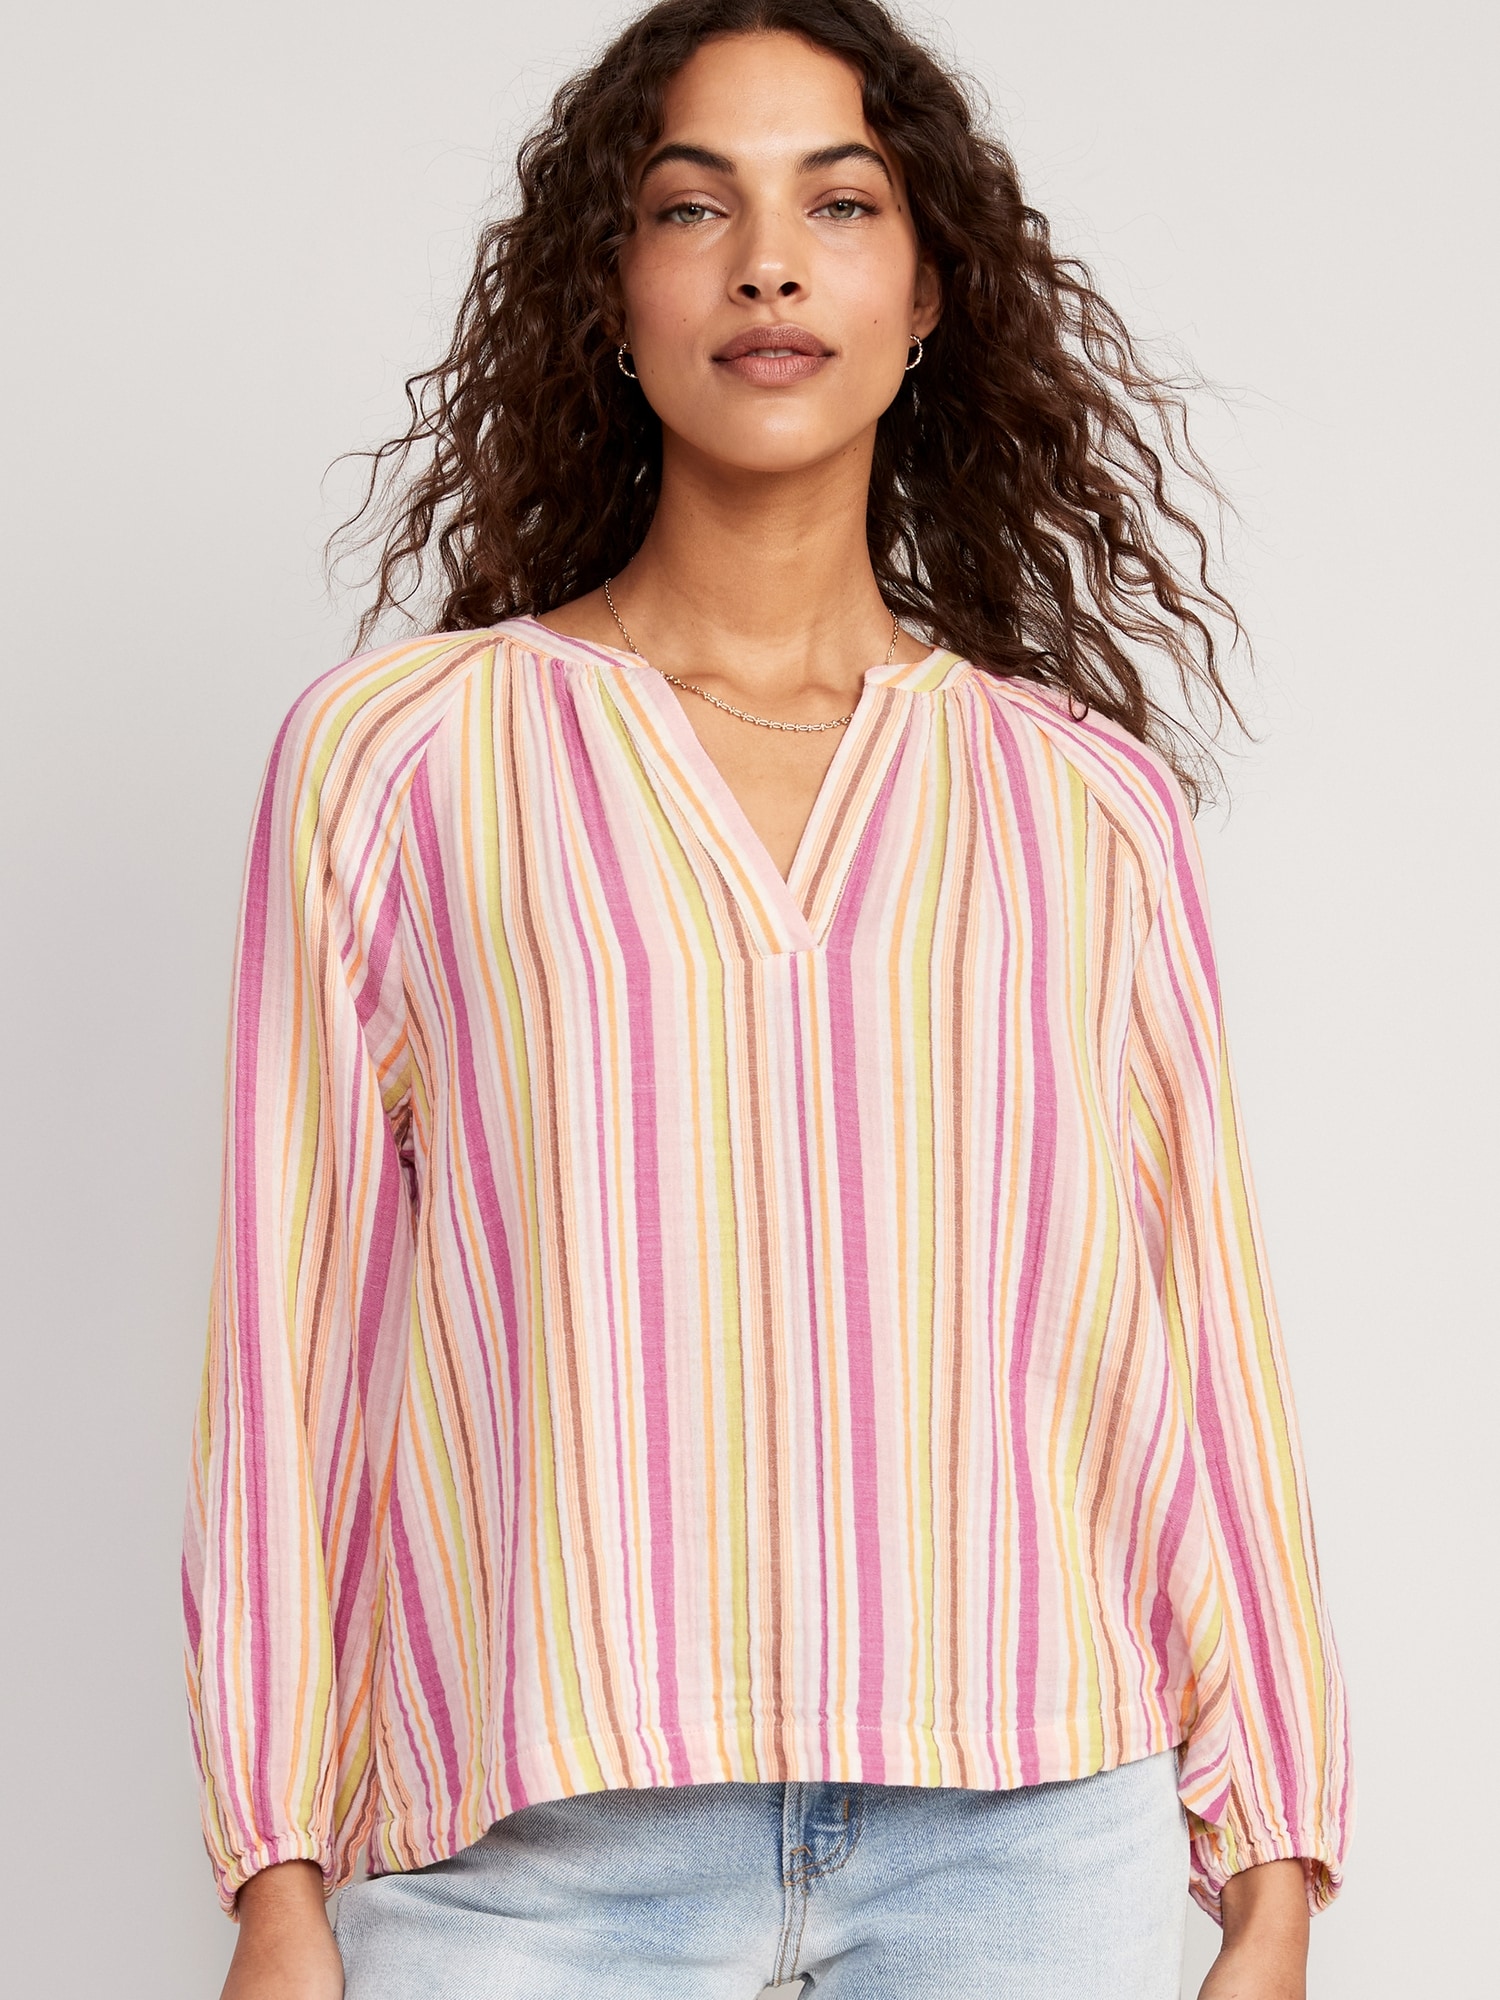 Striped Long Sleeve Shirts | Old Navy